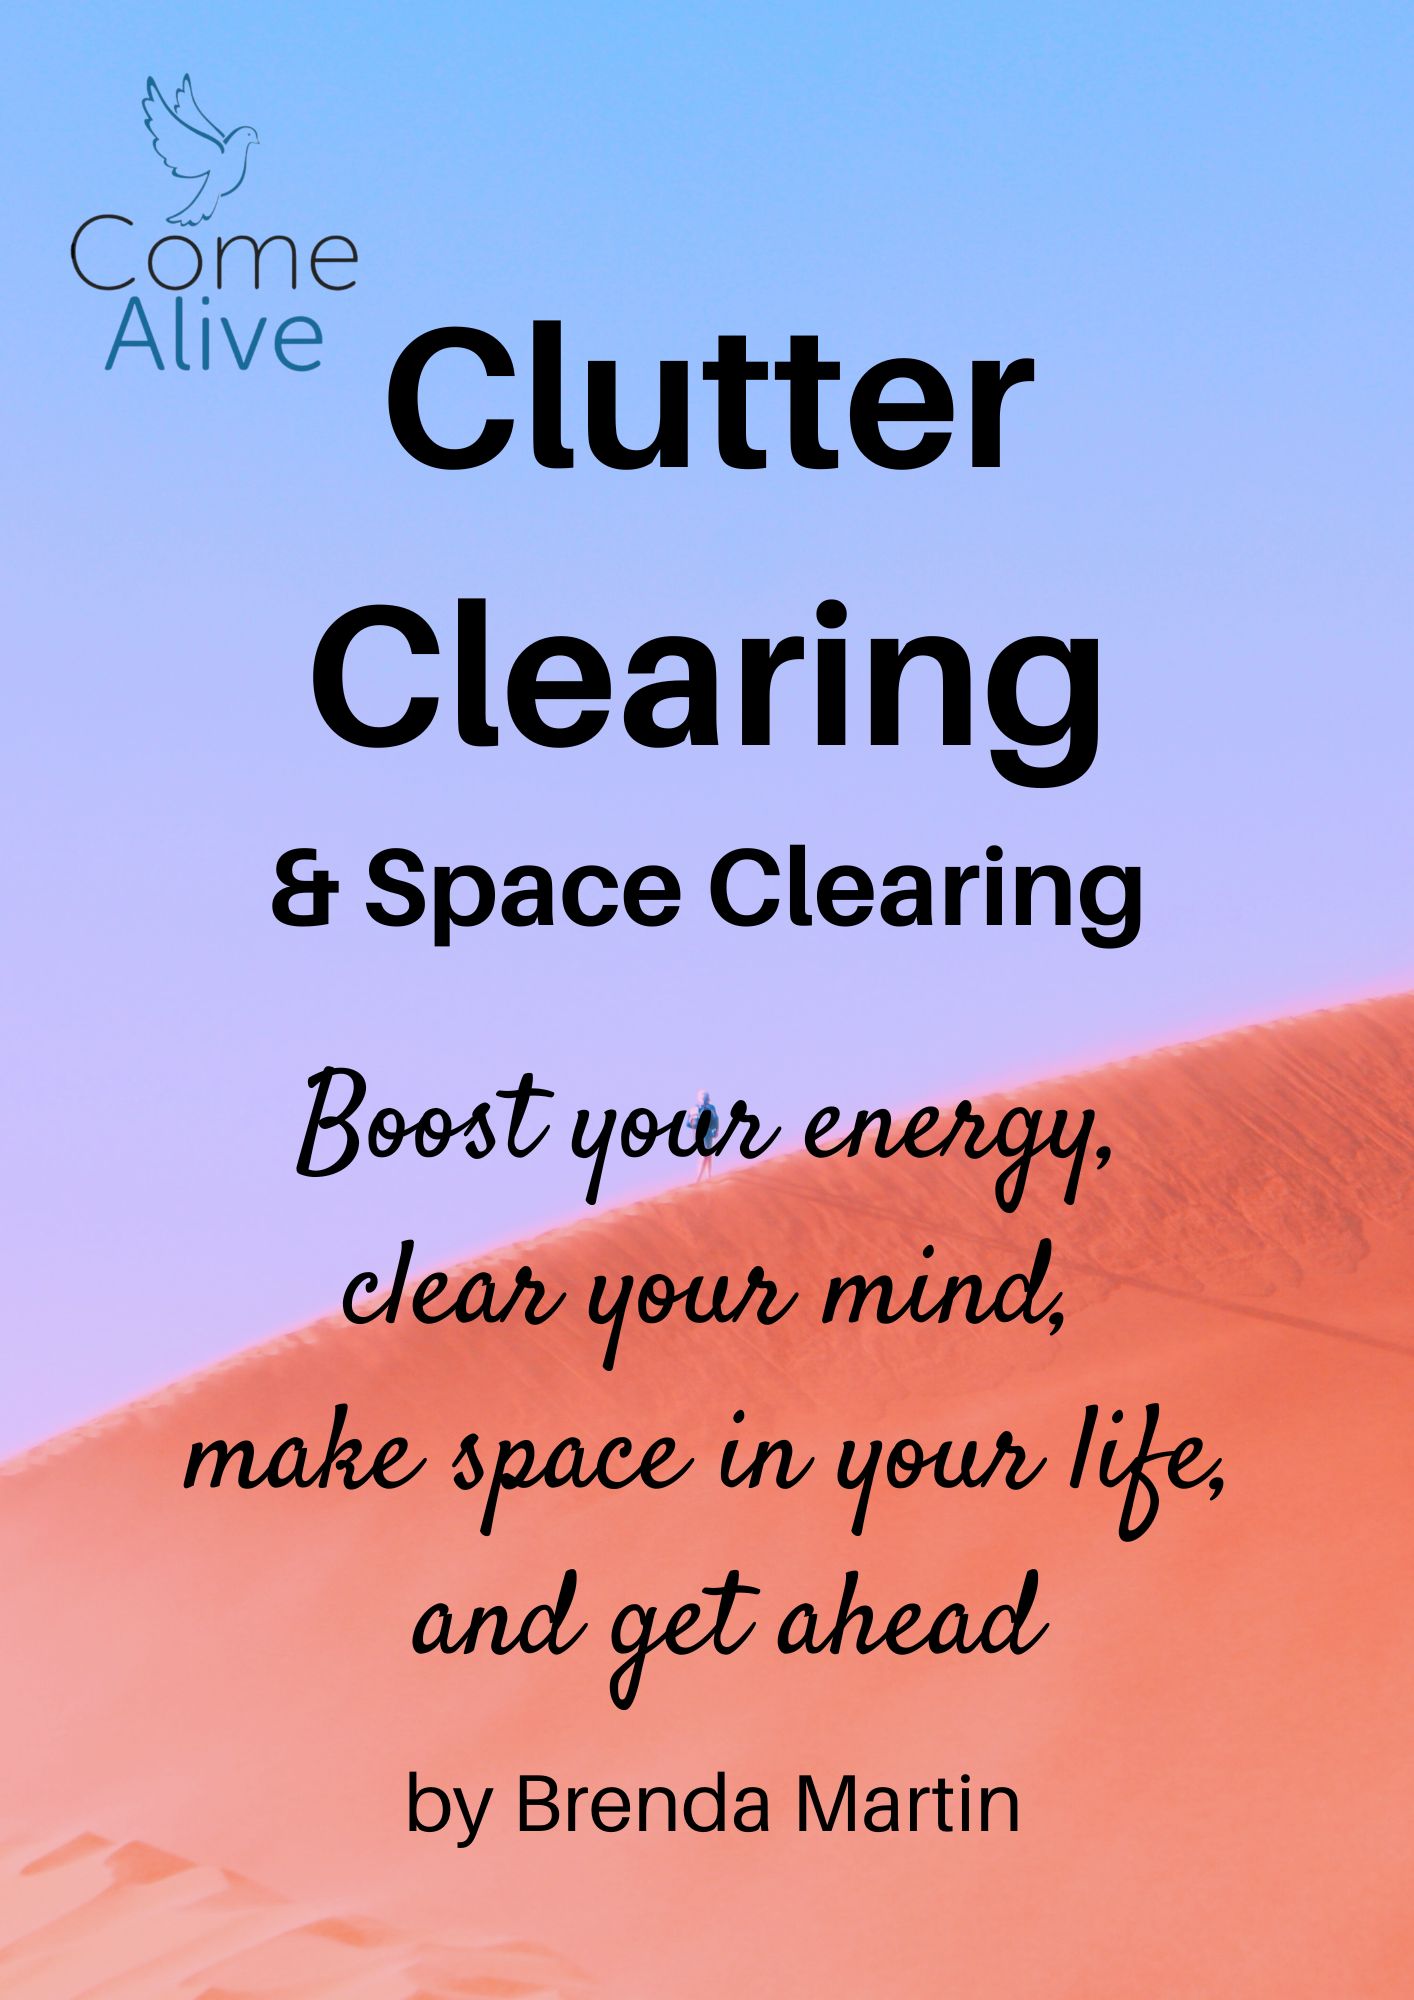 Clutter Clearing